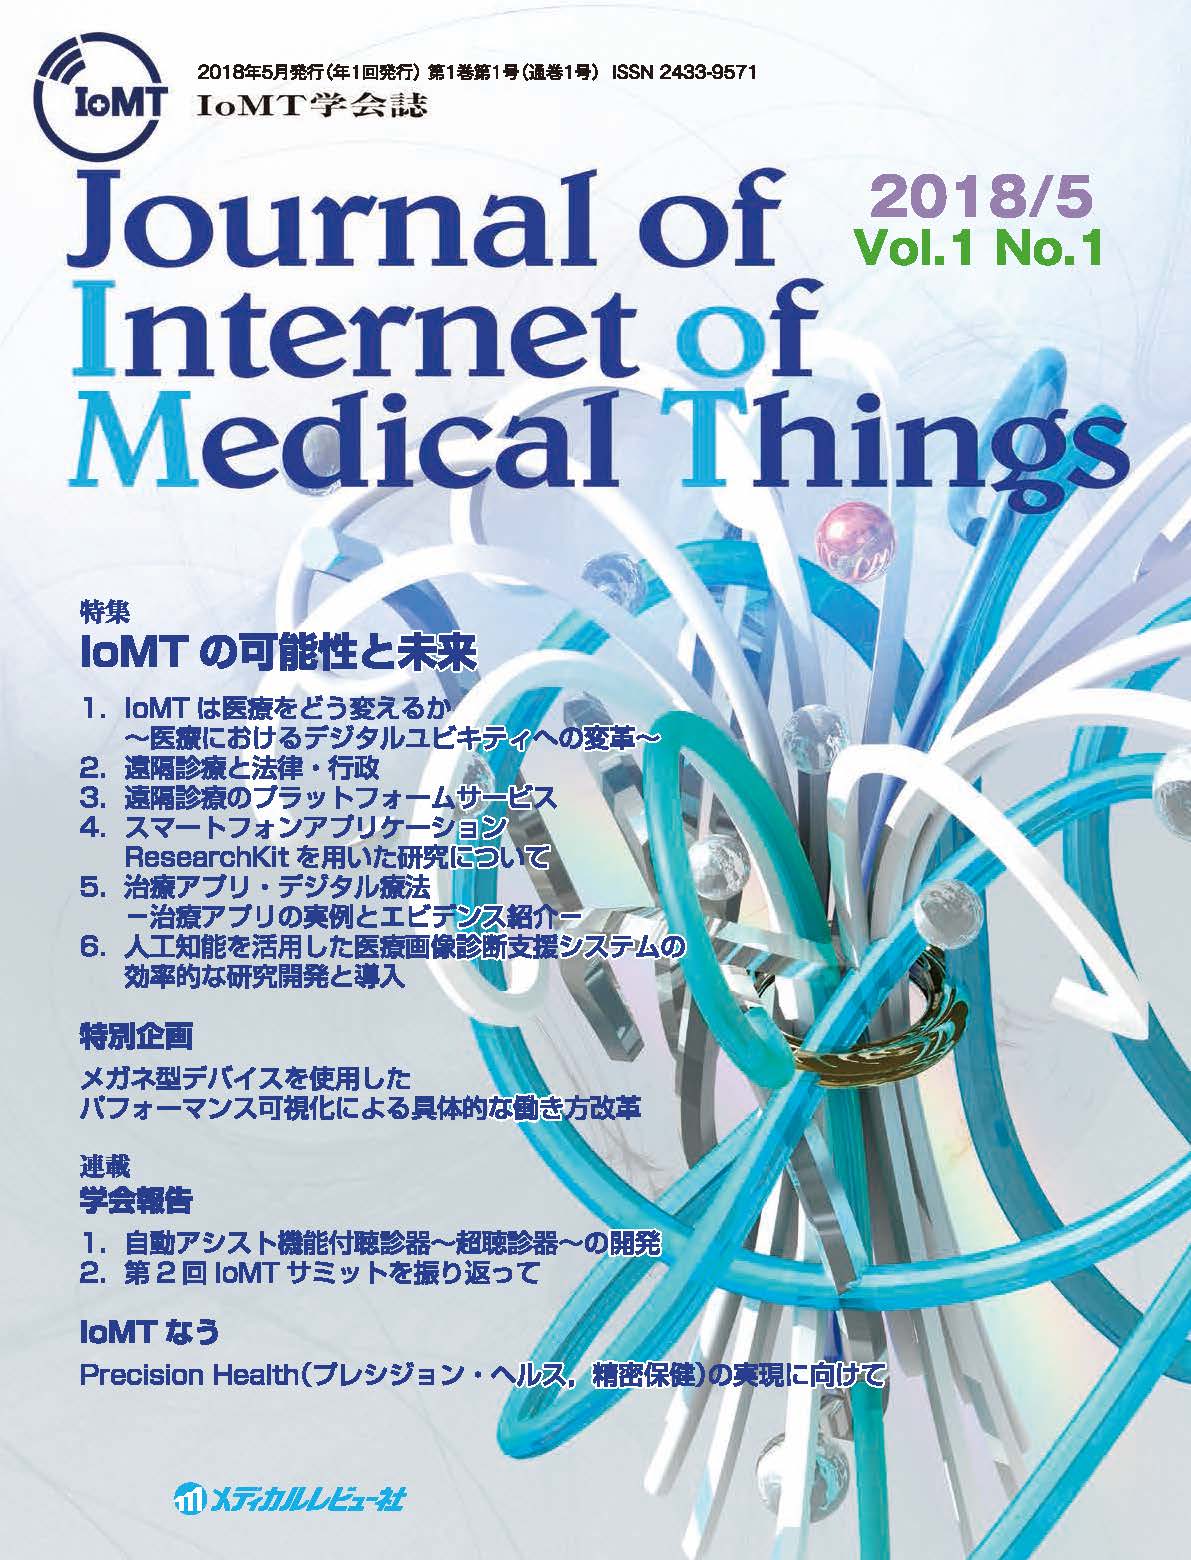 Journal of Internet of Medical Things 2018年5月号（Vol.1 No.1）